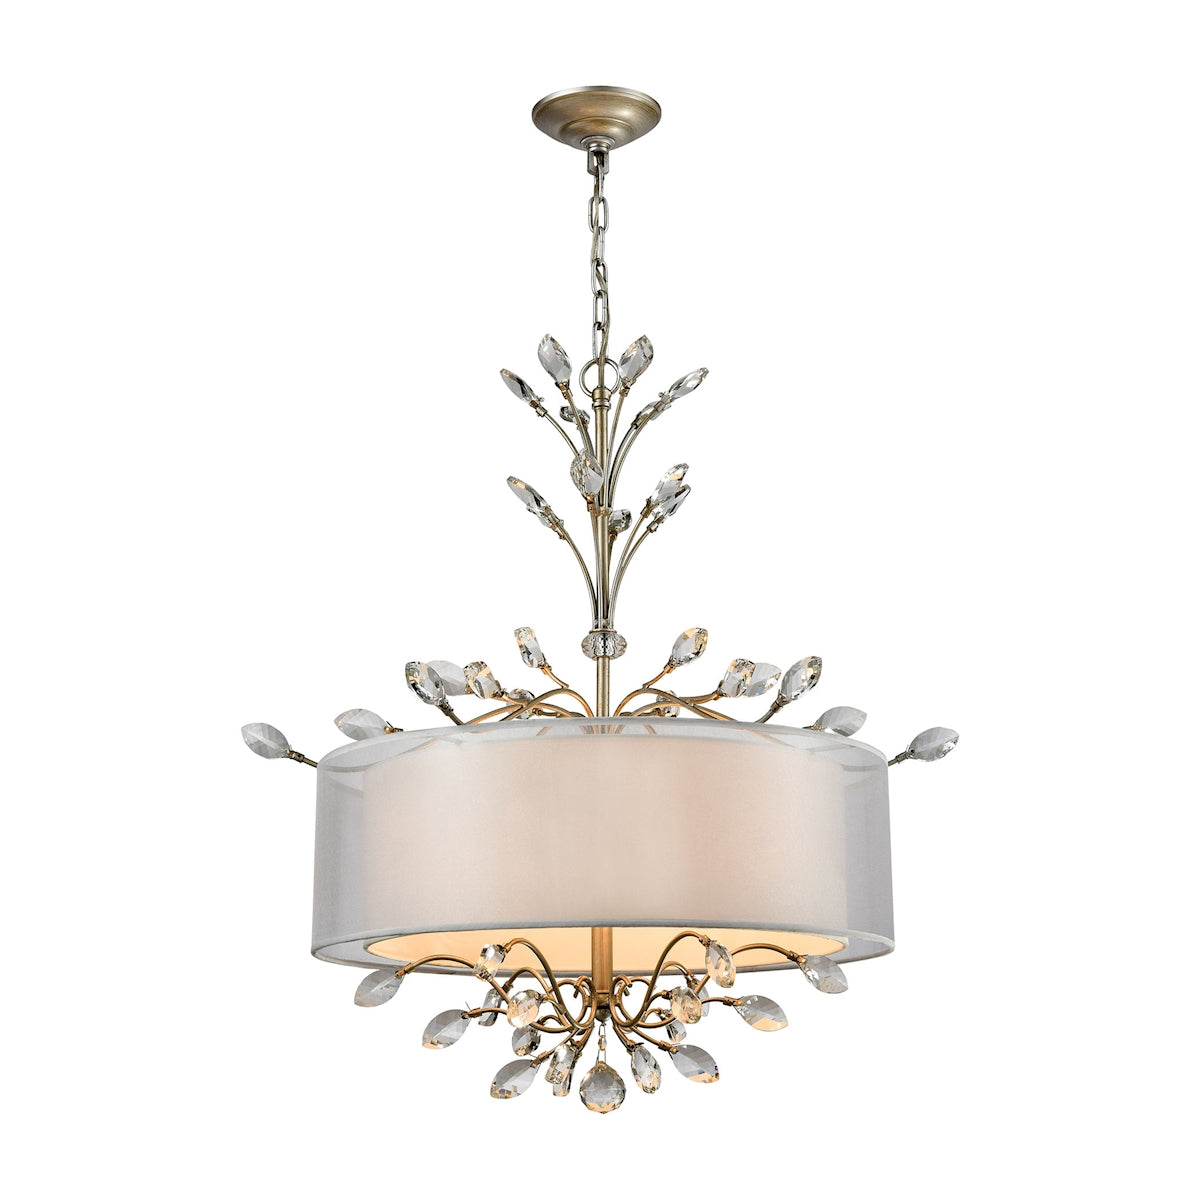 ELK Lighting 16282/4 Asbury 4-Light Chandelier in Aged Silver with Organza and White Fabric Shade